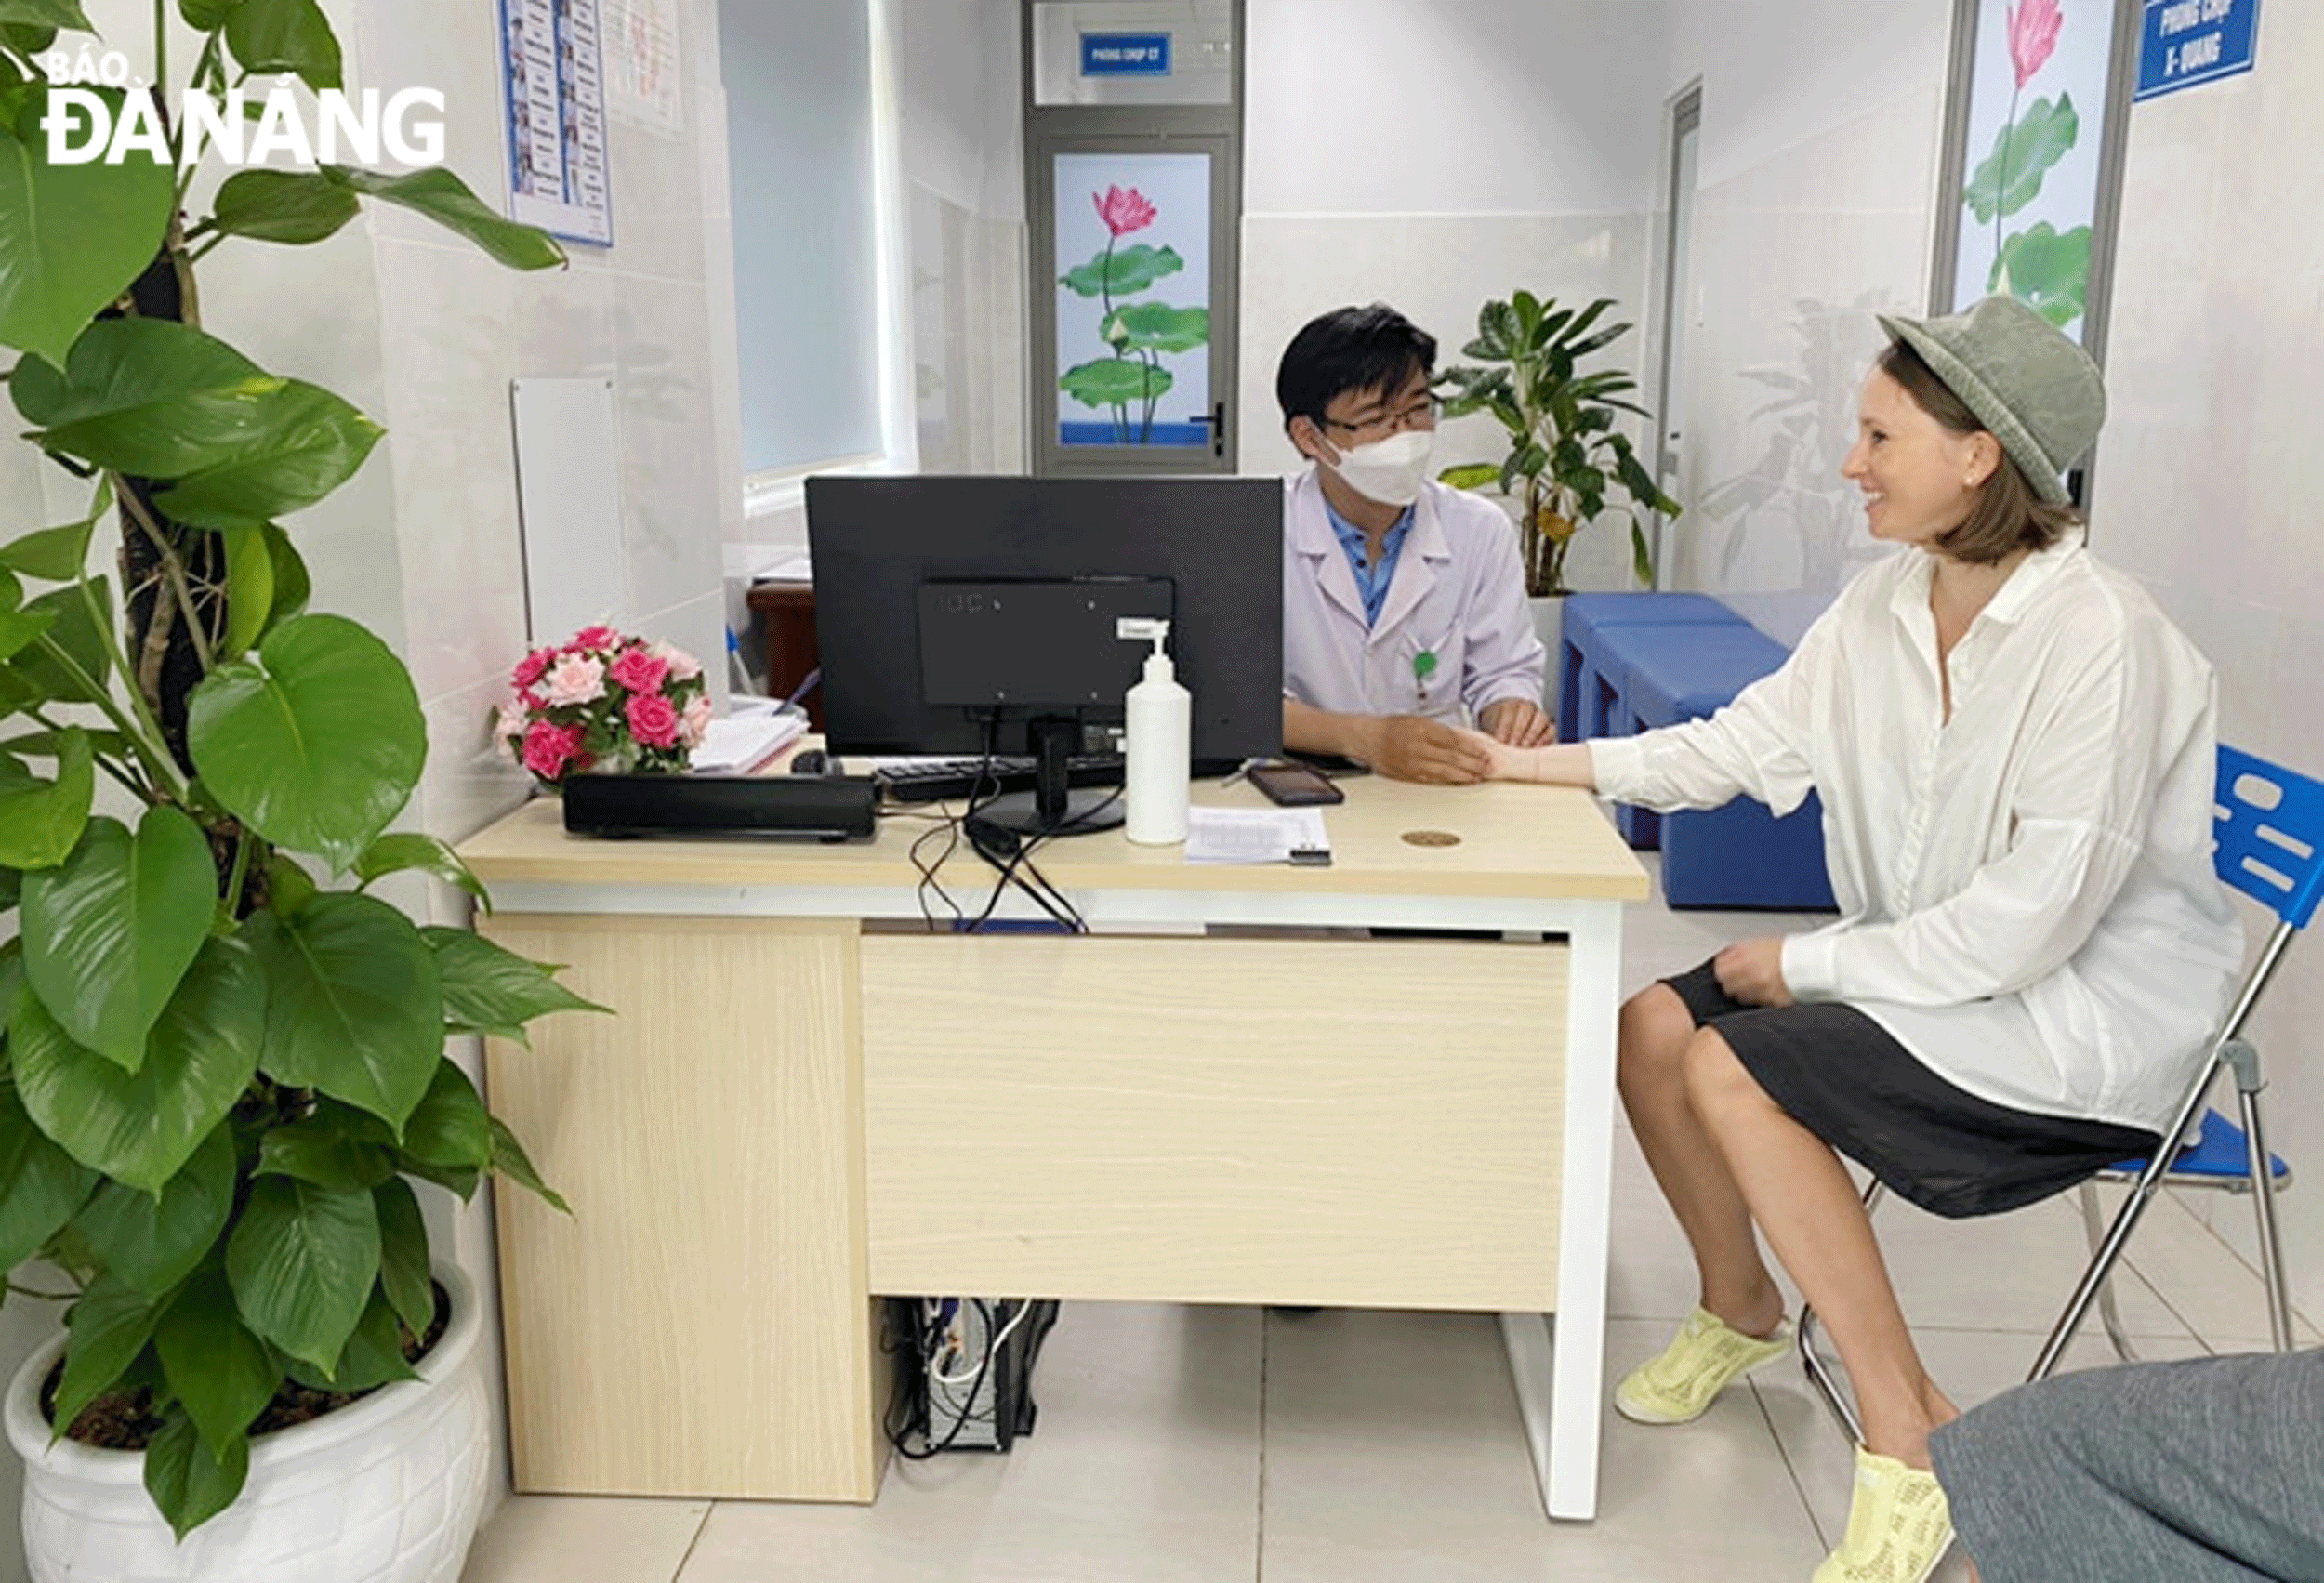 Foreign tourists impressed with Da Nang medical tourism services